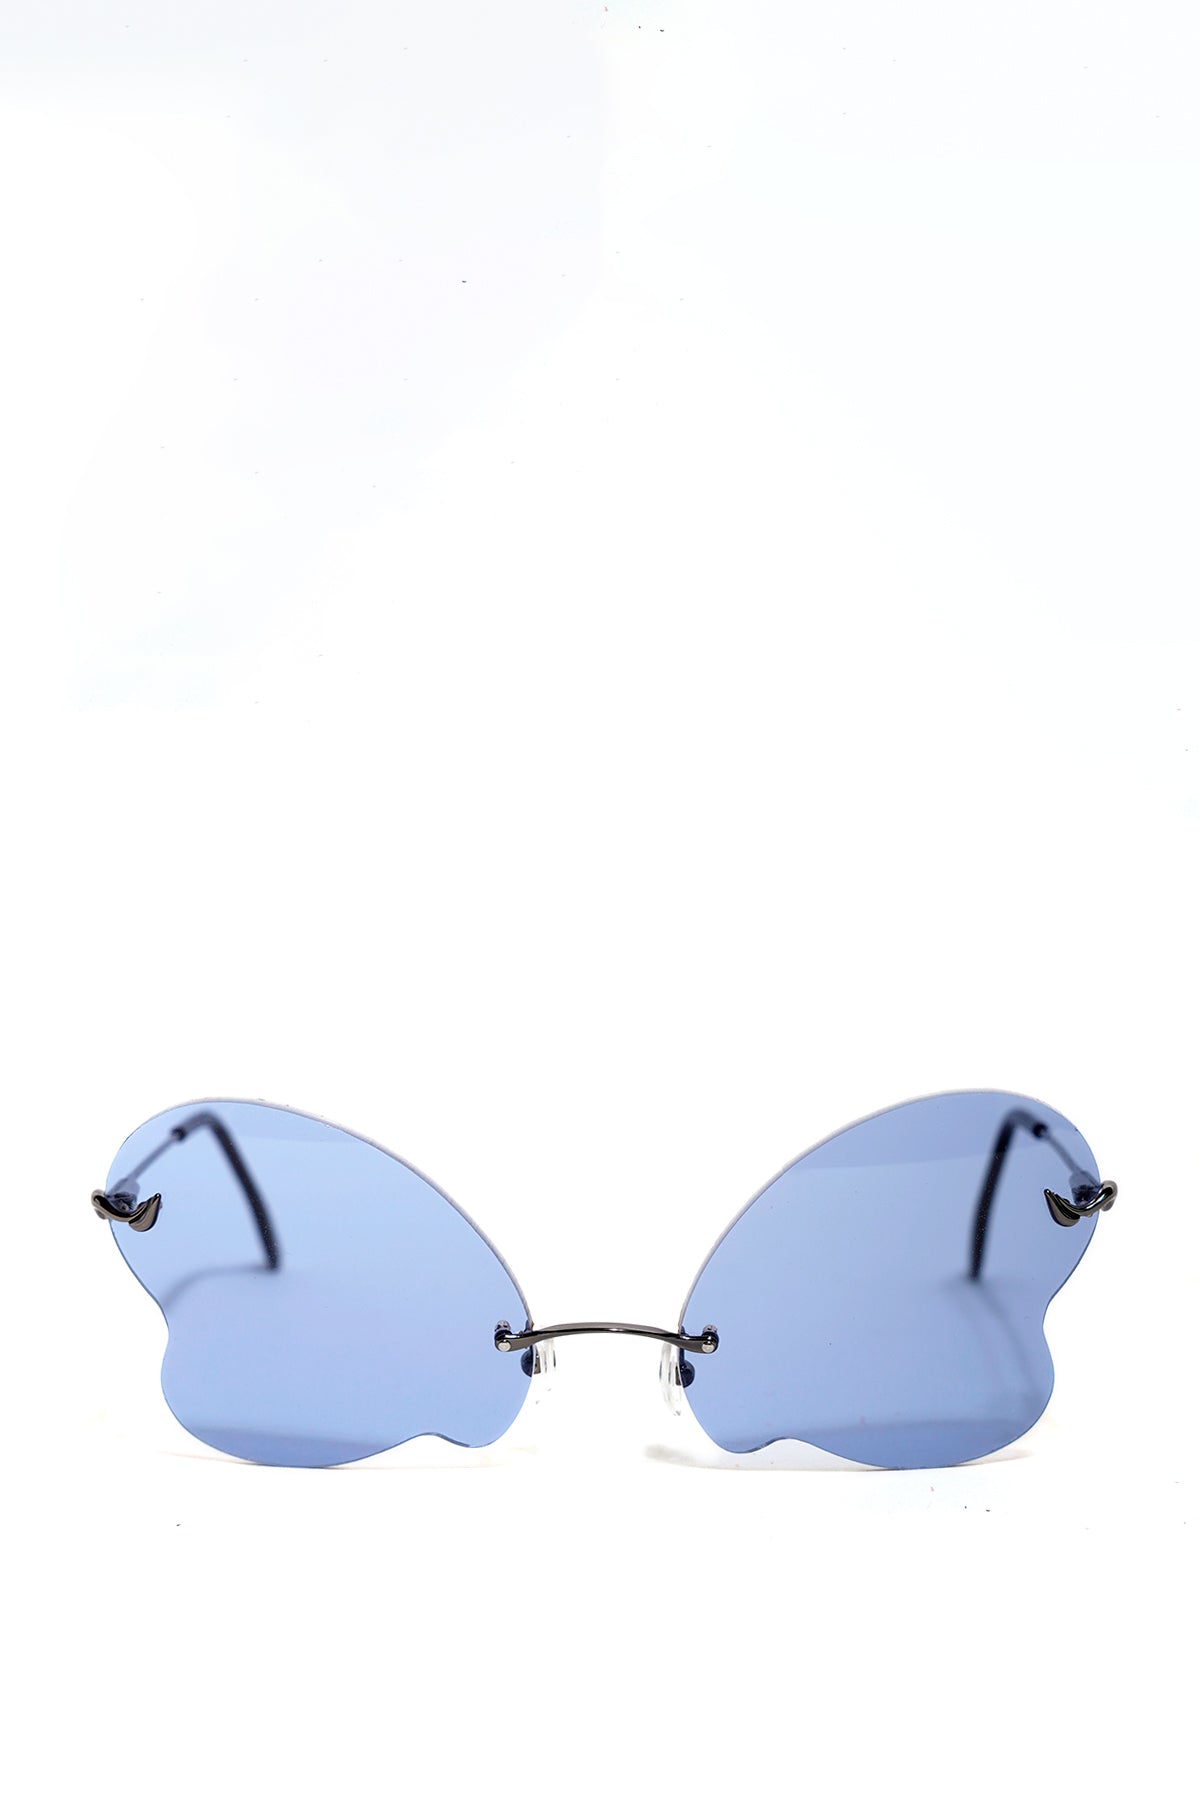 BLUE BUTTERFLY SUNGLASSES